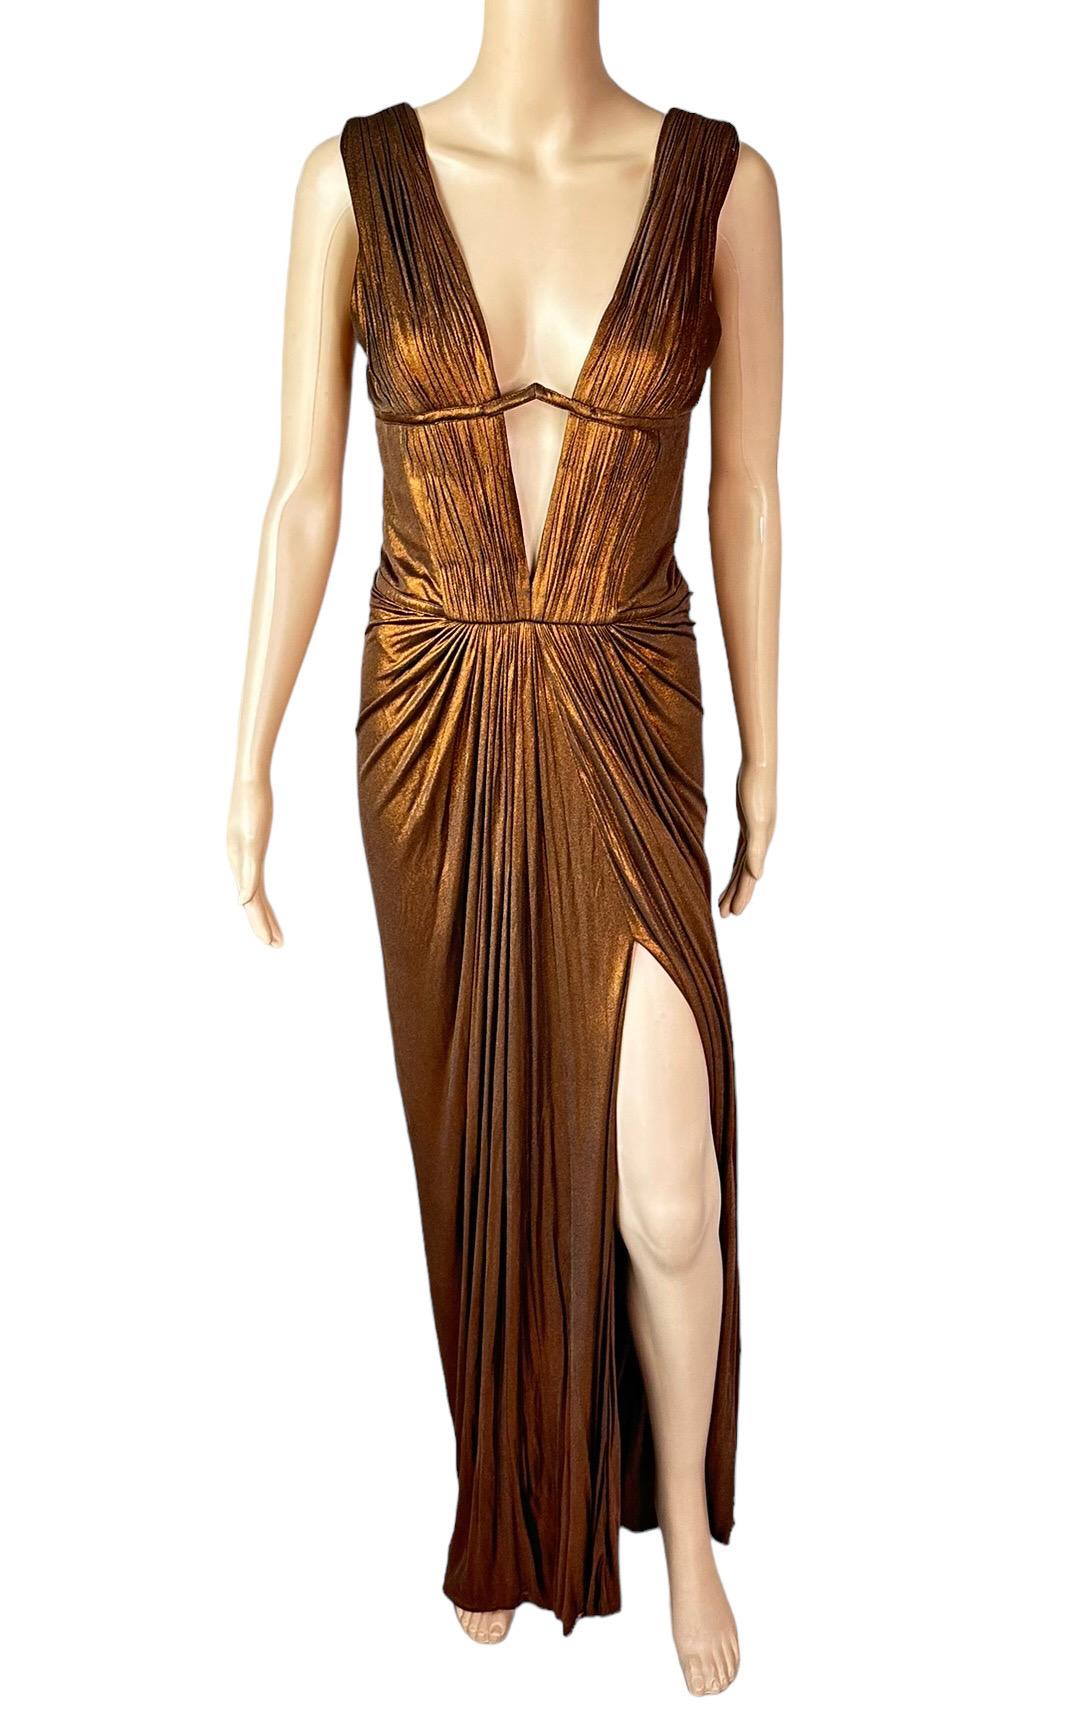 Roberto Cavalli F/W 2007 Metallic Plunging Neckline Open Back Evening Dress Gown In Good Condition For Sale In Naples, FL